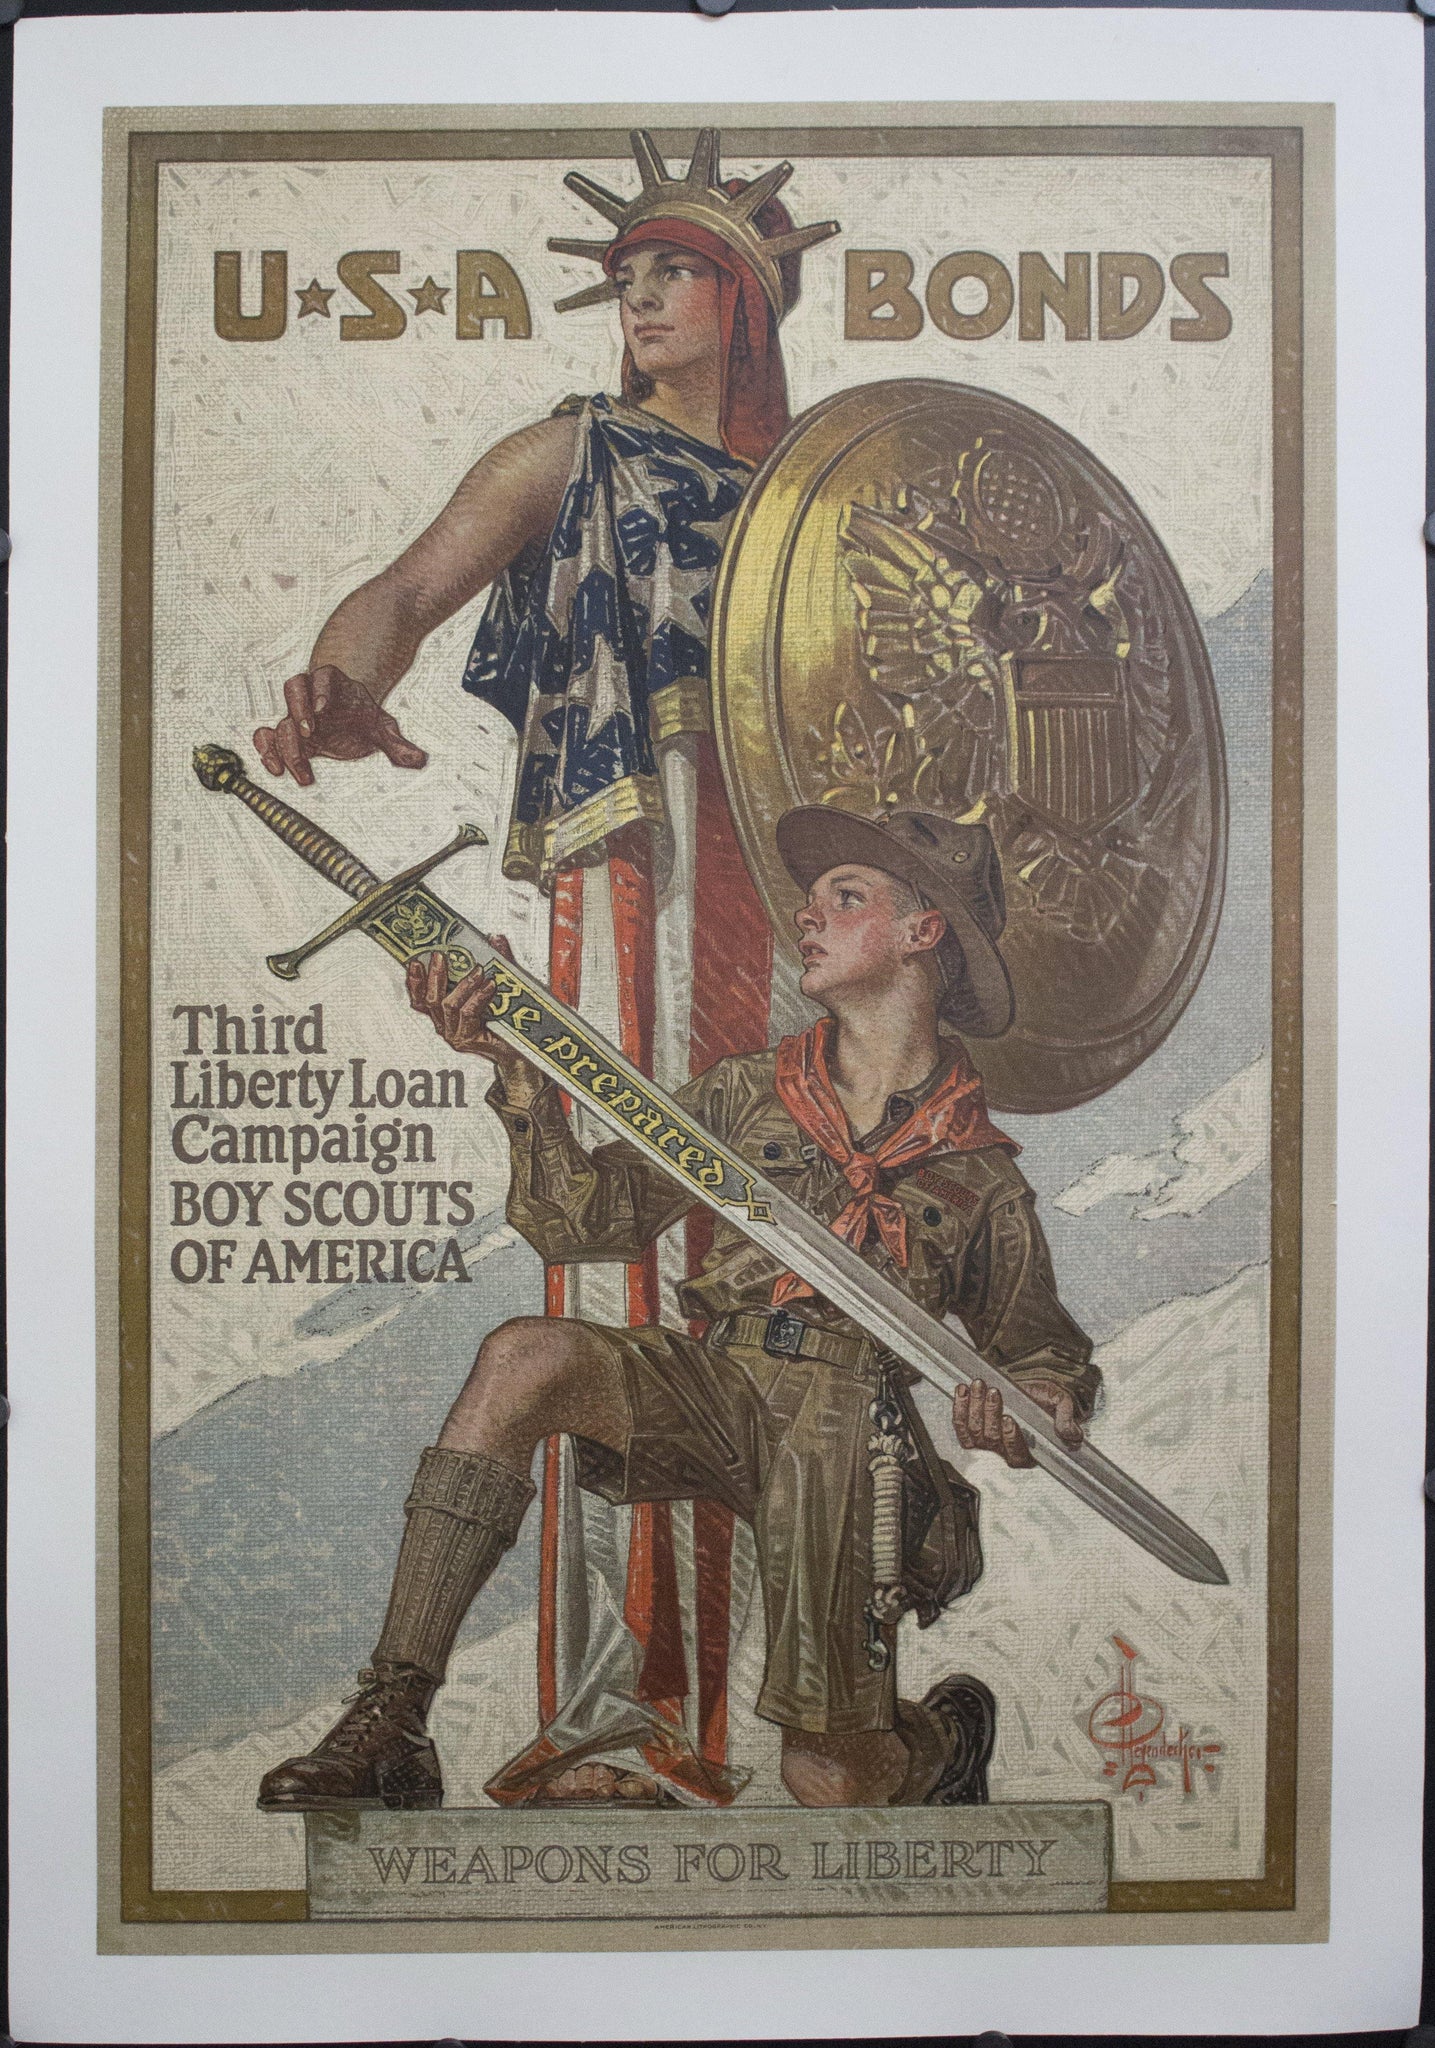 1917 USA Bonds | Third Liberty Loan Campaign Boy Scouts of America | Weapons for Liberty - Golden Age Posters